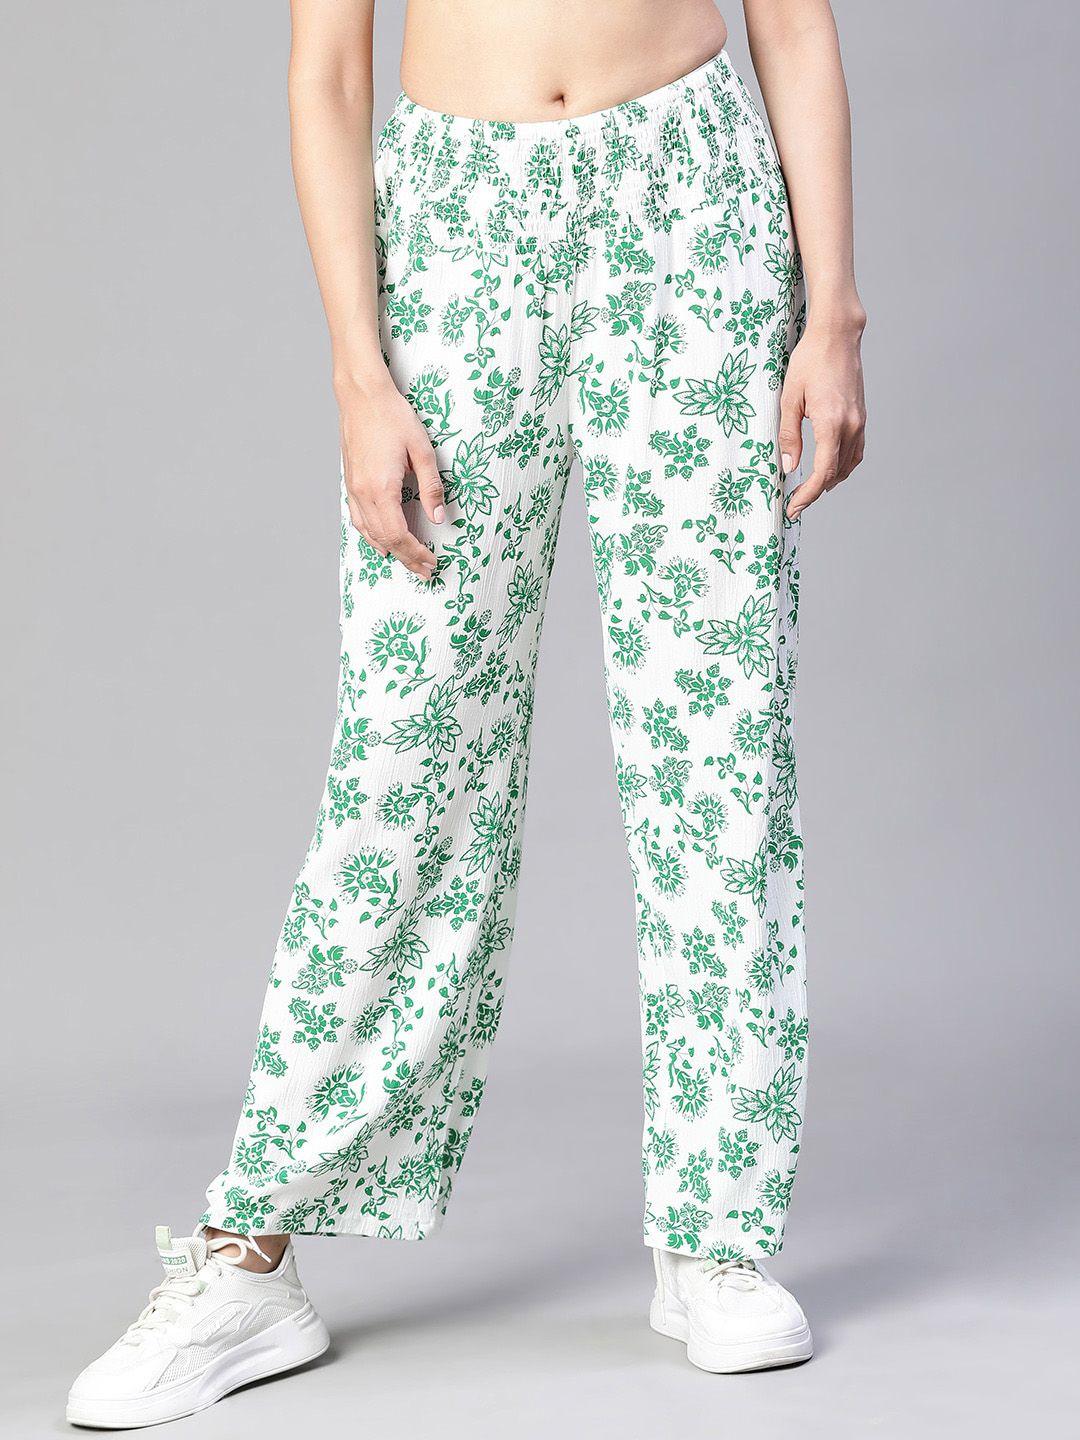 oxolloxo-women-floral-printed-relaxed-loose-fit-easy-wash-trousers